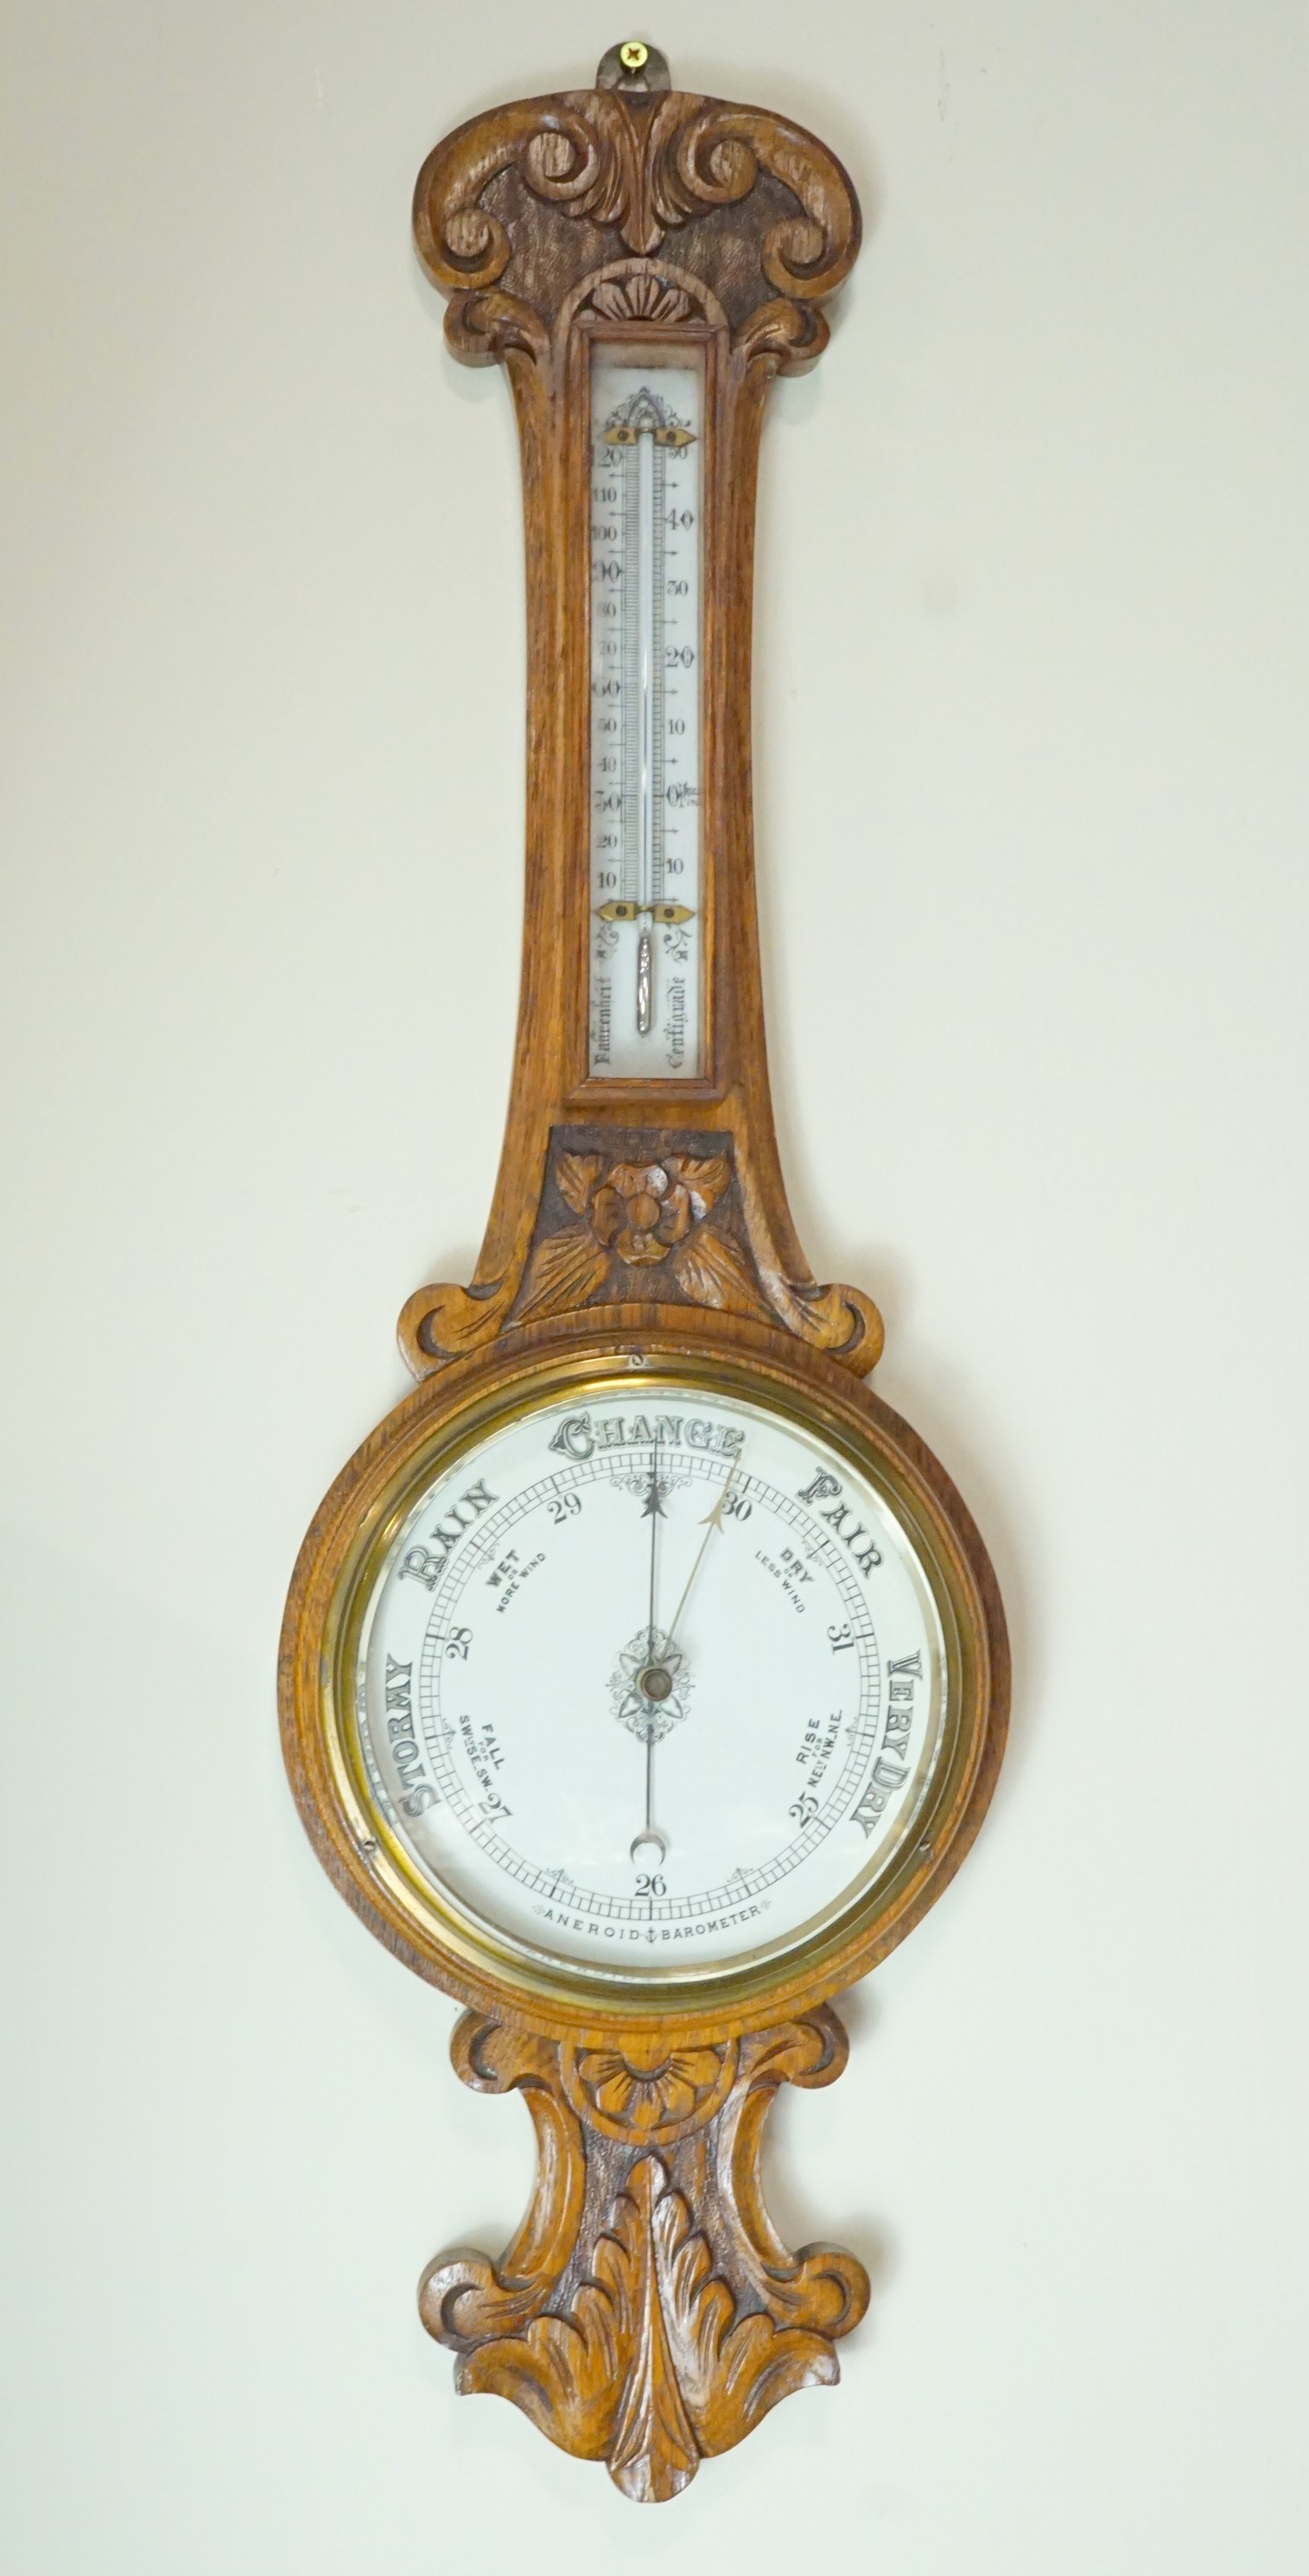 A late 19th / early 20th Century carved oak banjo aneroid barometer, 85 cm